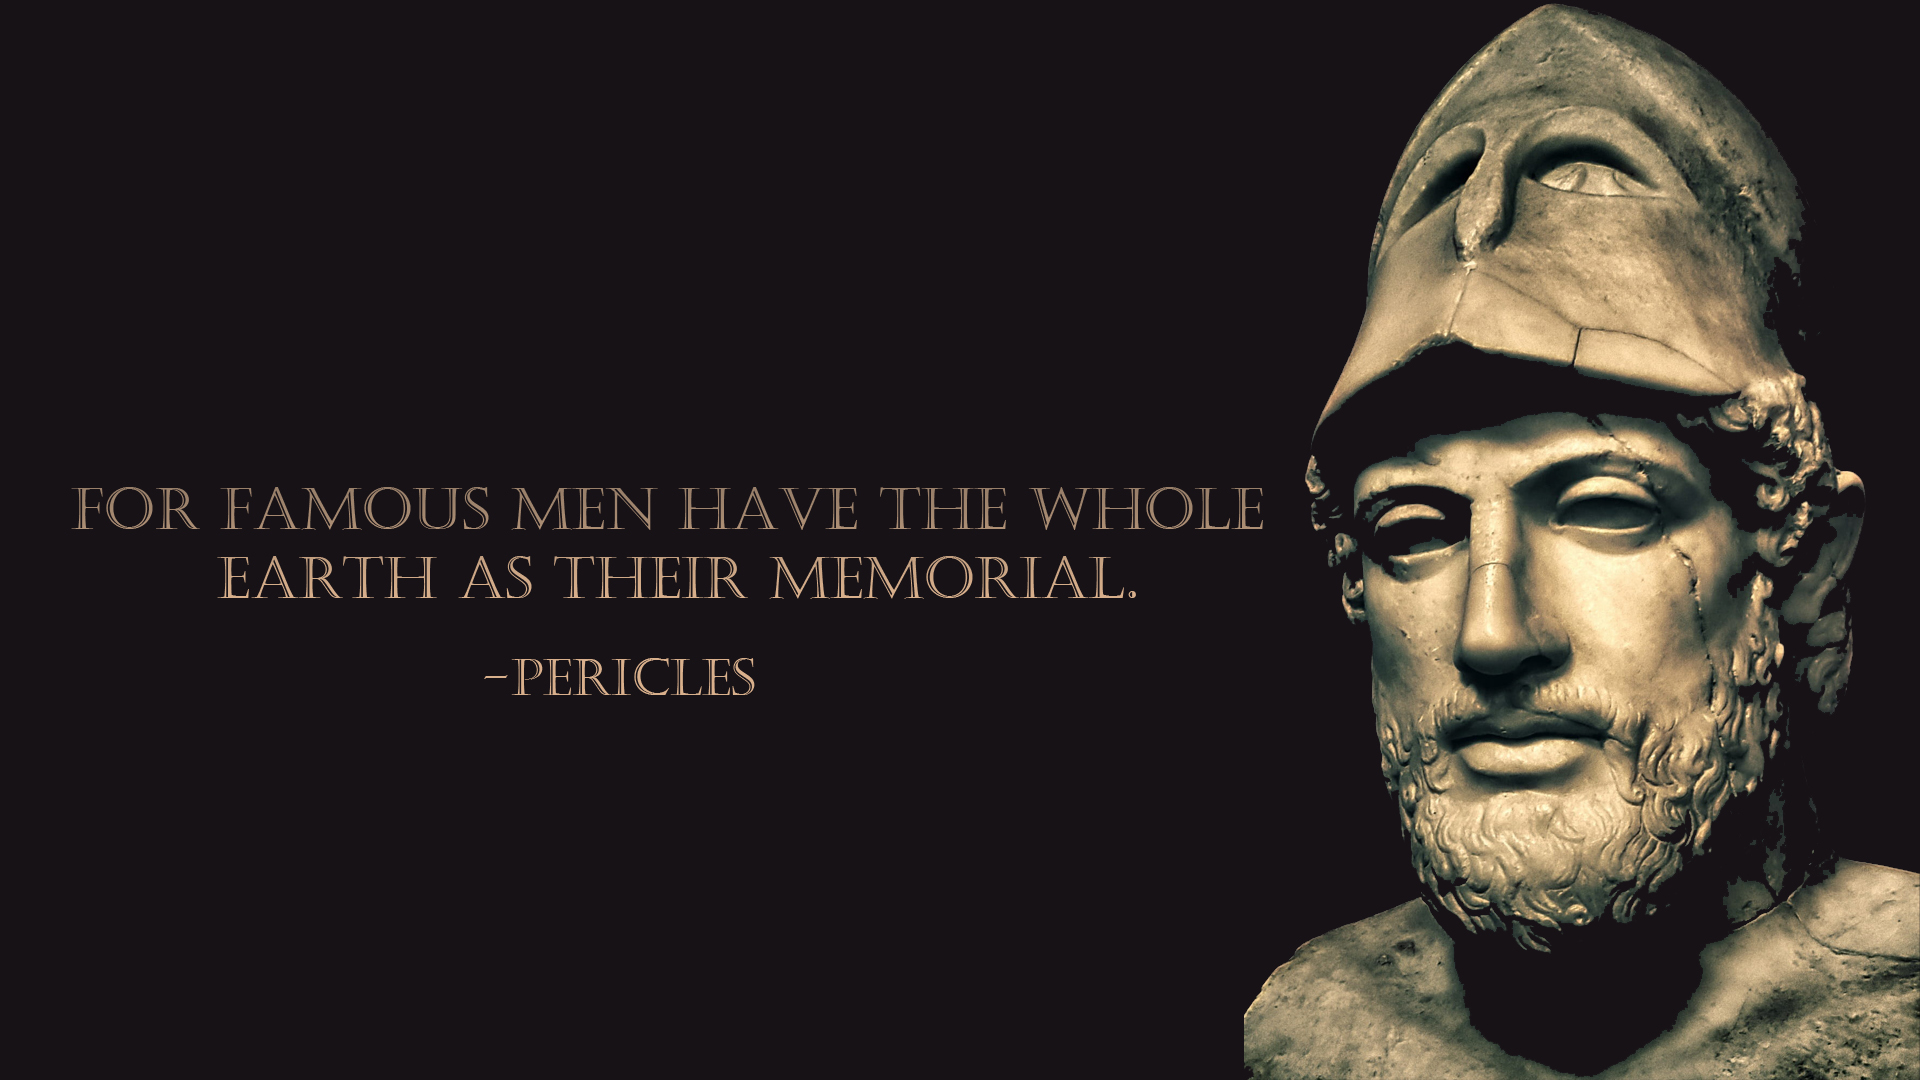 General 1920x1080 Pericles quote philosophy simple background statue text